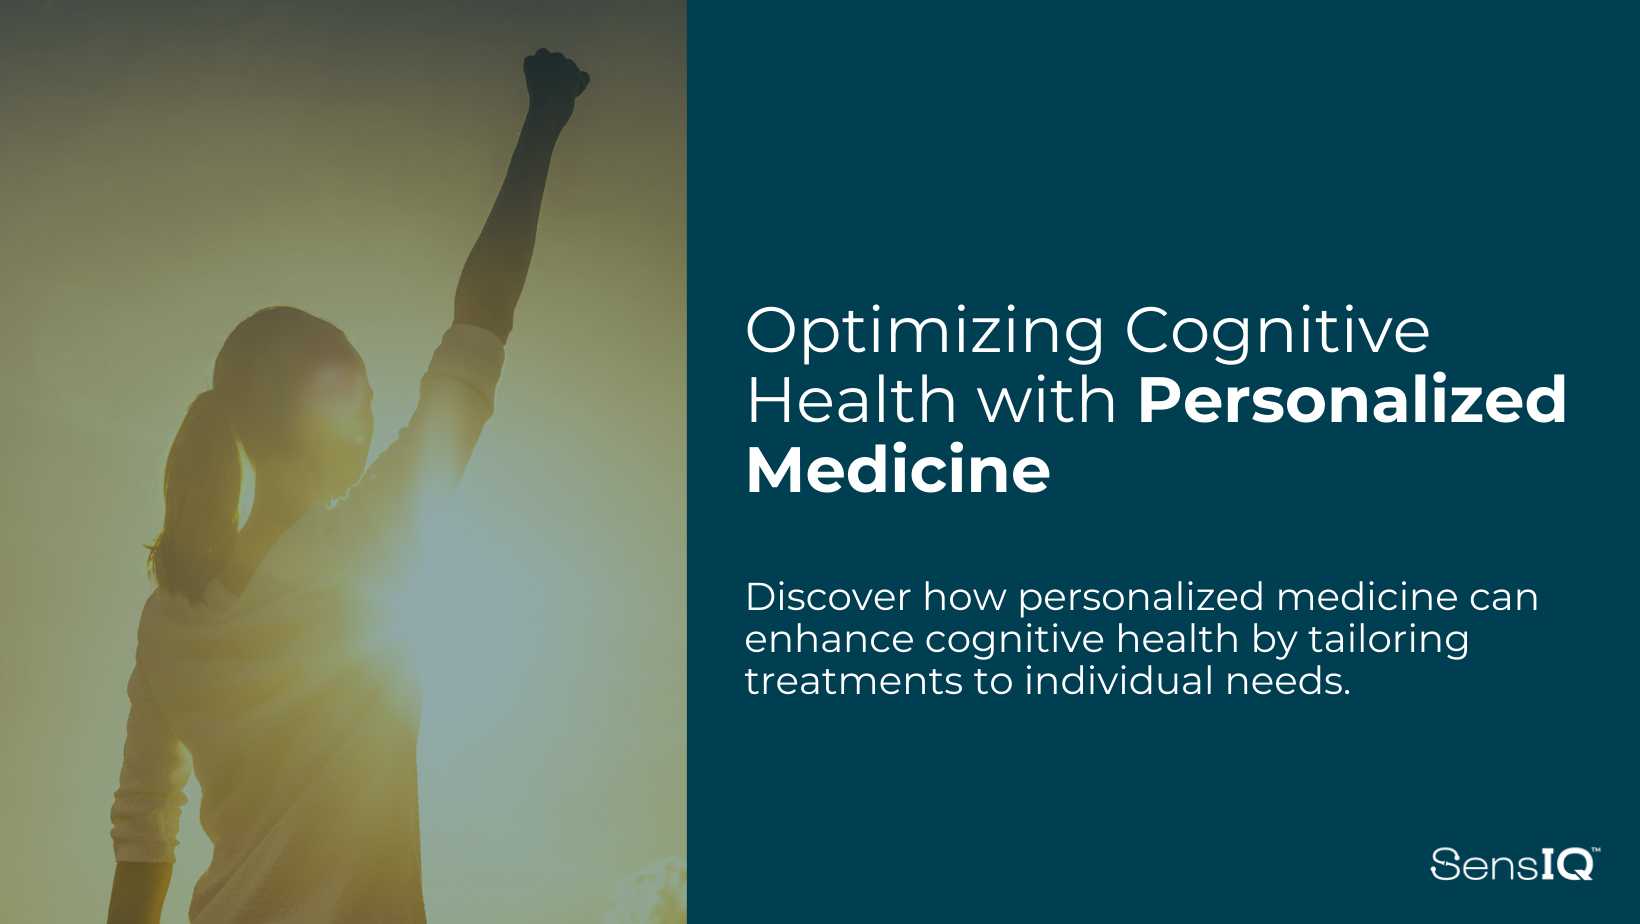 Optimizing Cognitive Health with Personalized Medicine